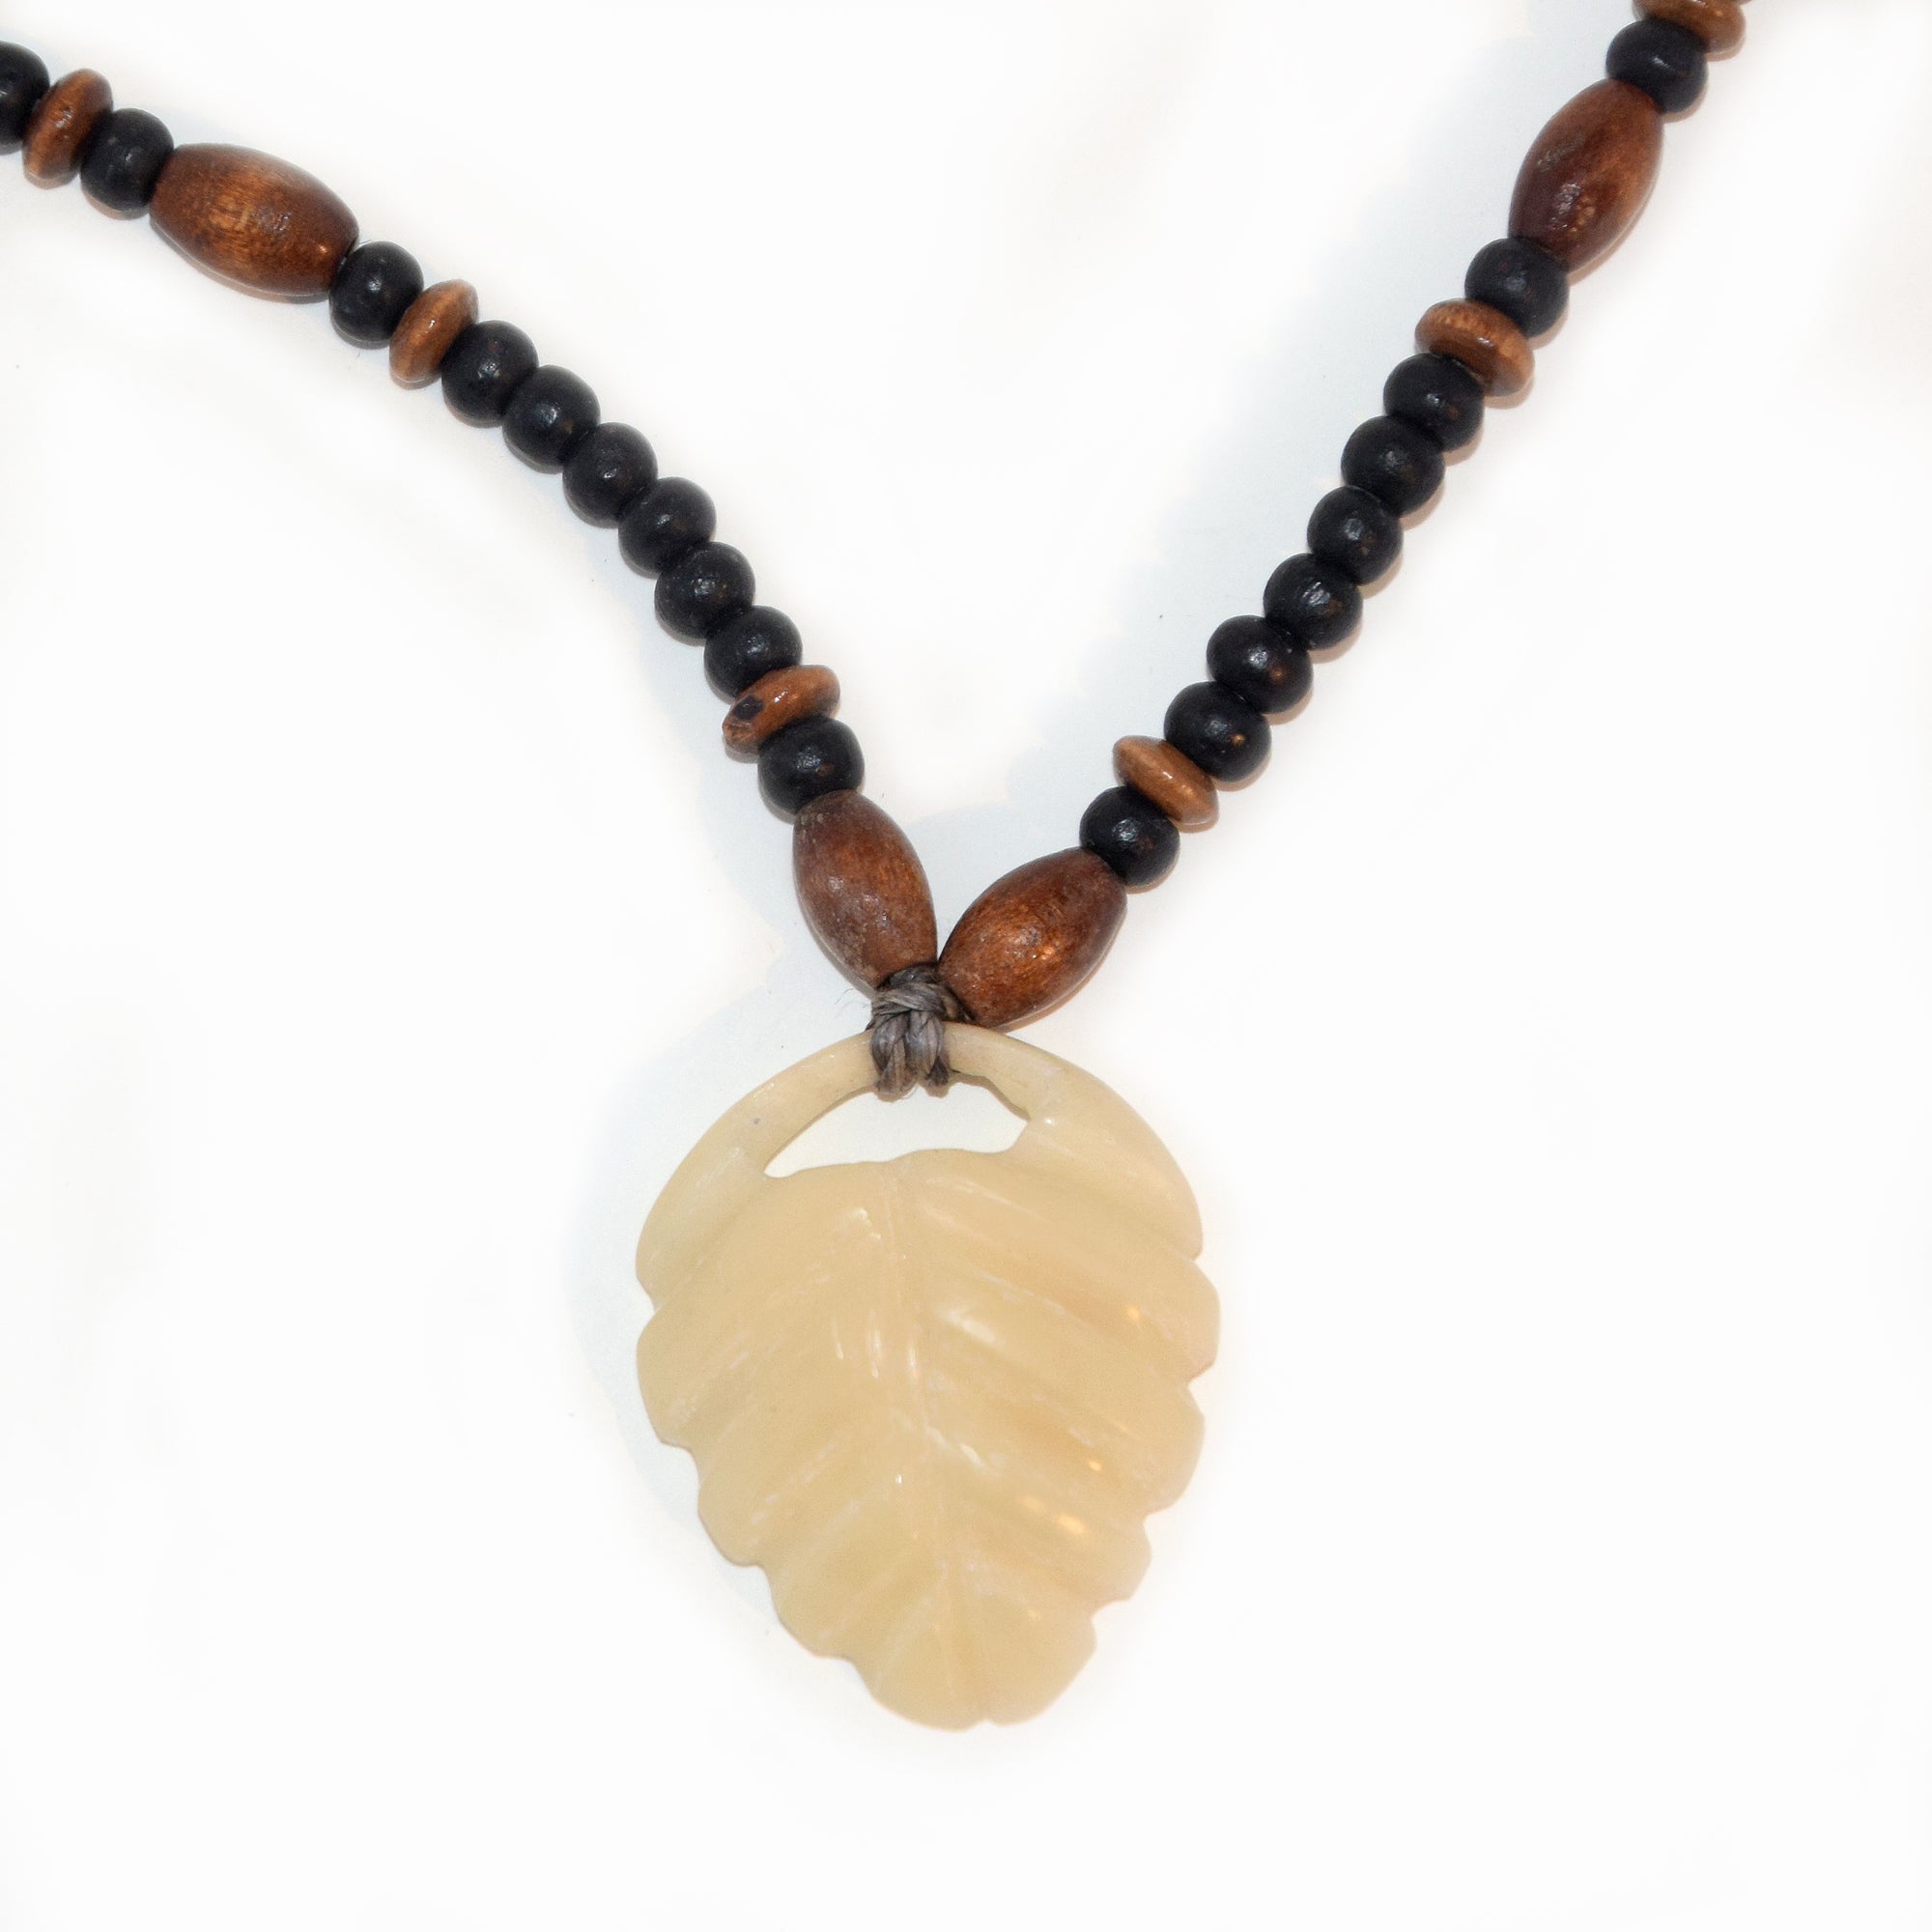 Carved tagua palm nut pendant and wooden bead necklace